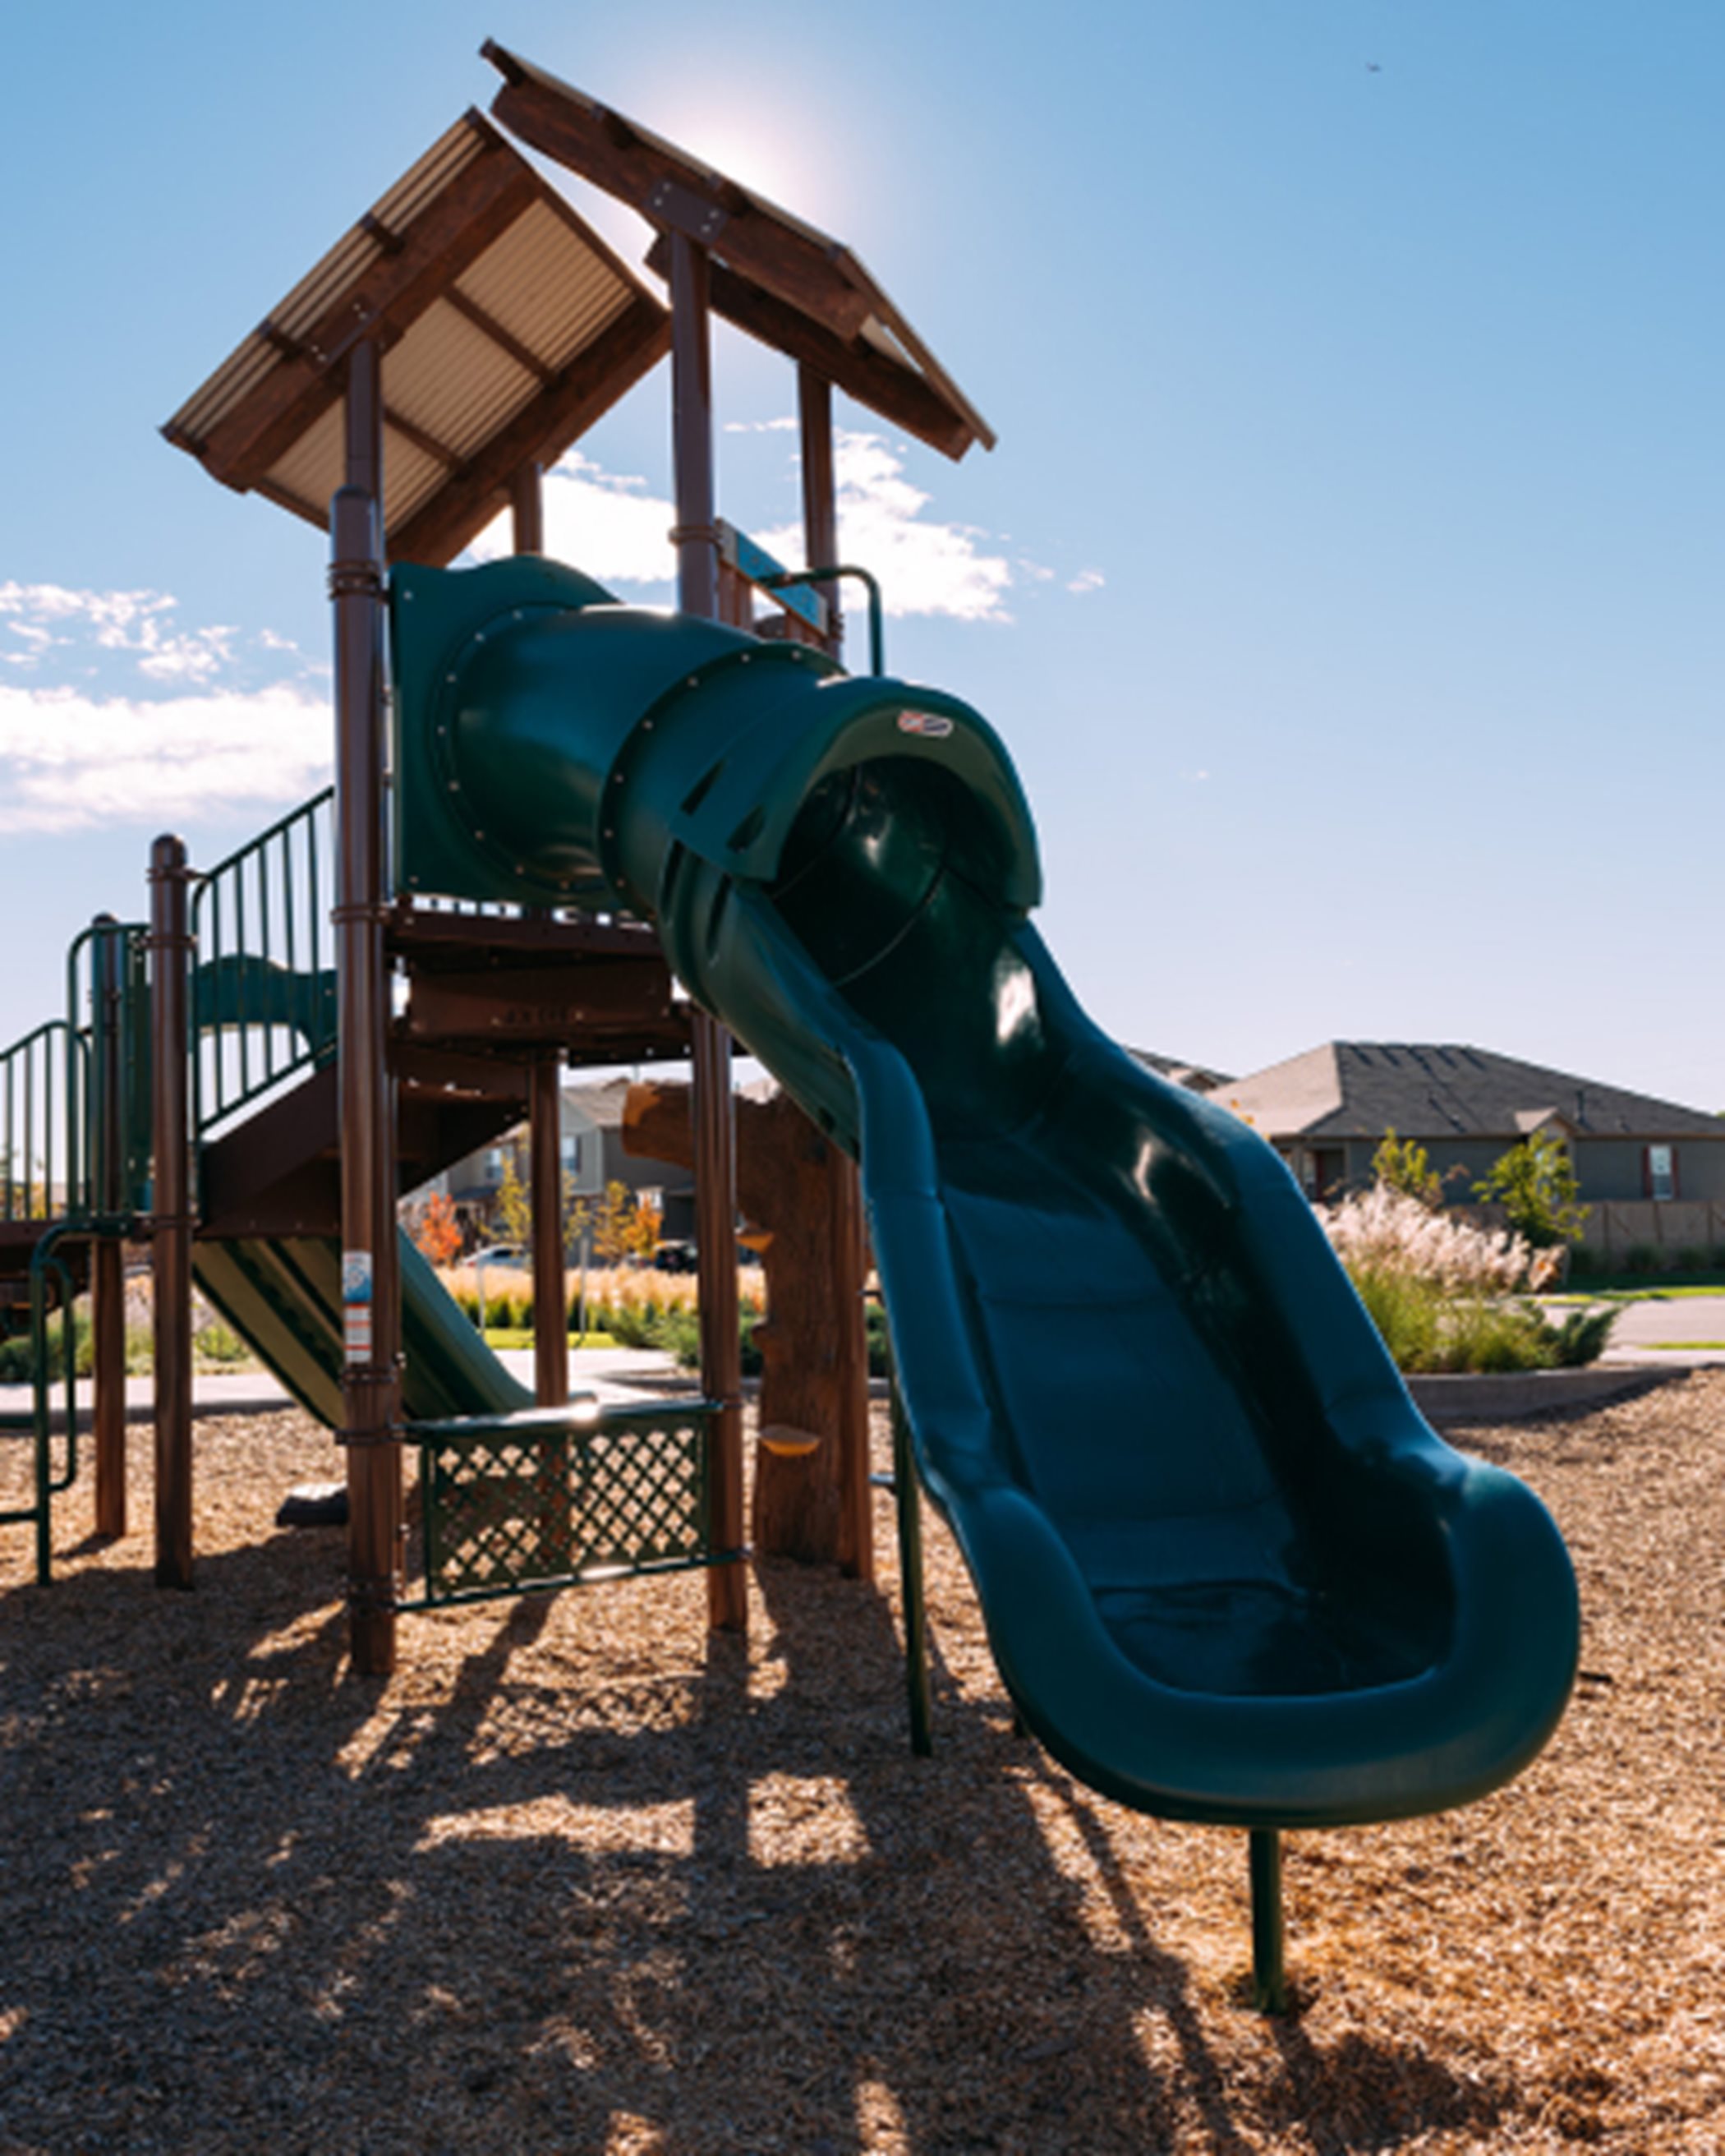 Playground structure in the community